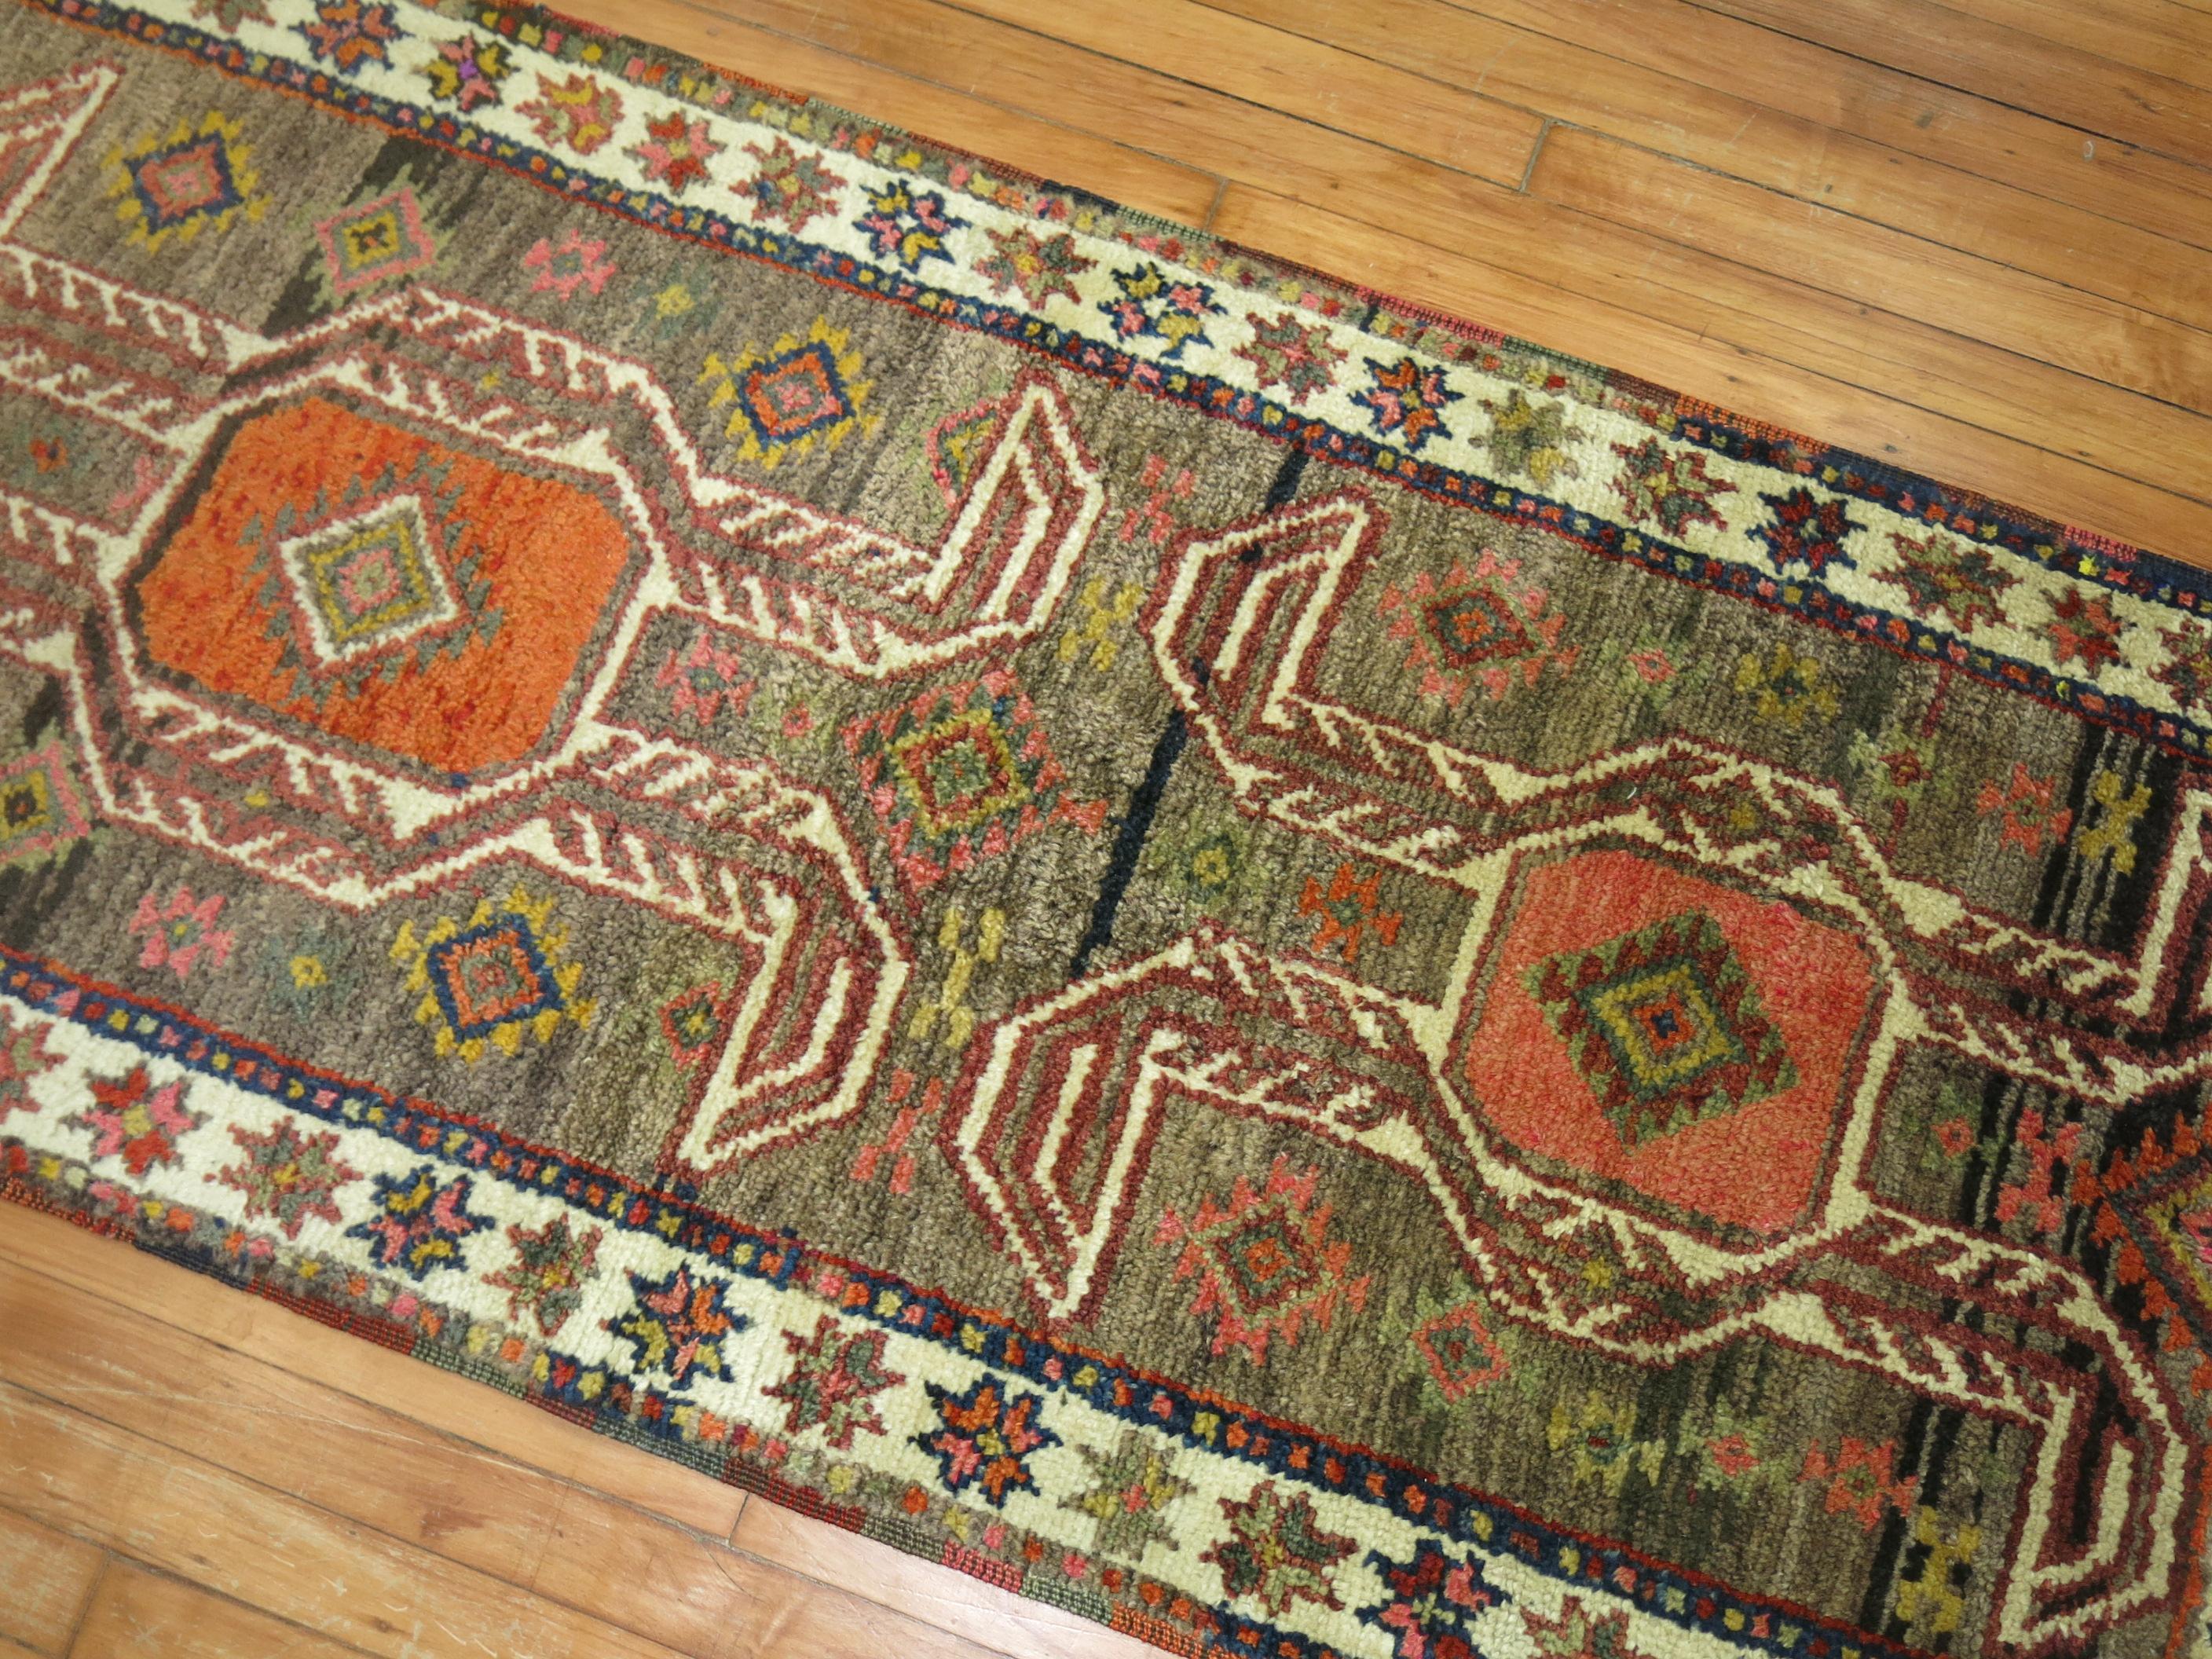 Mid 20th century tribal Turkish Anatolian runner with a tribal design in brown, orange, pink and ivory dominant accents

Measures: 2'8